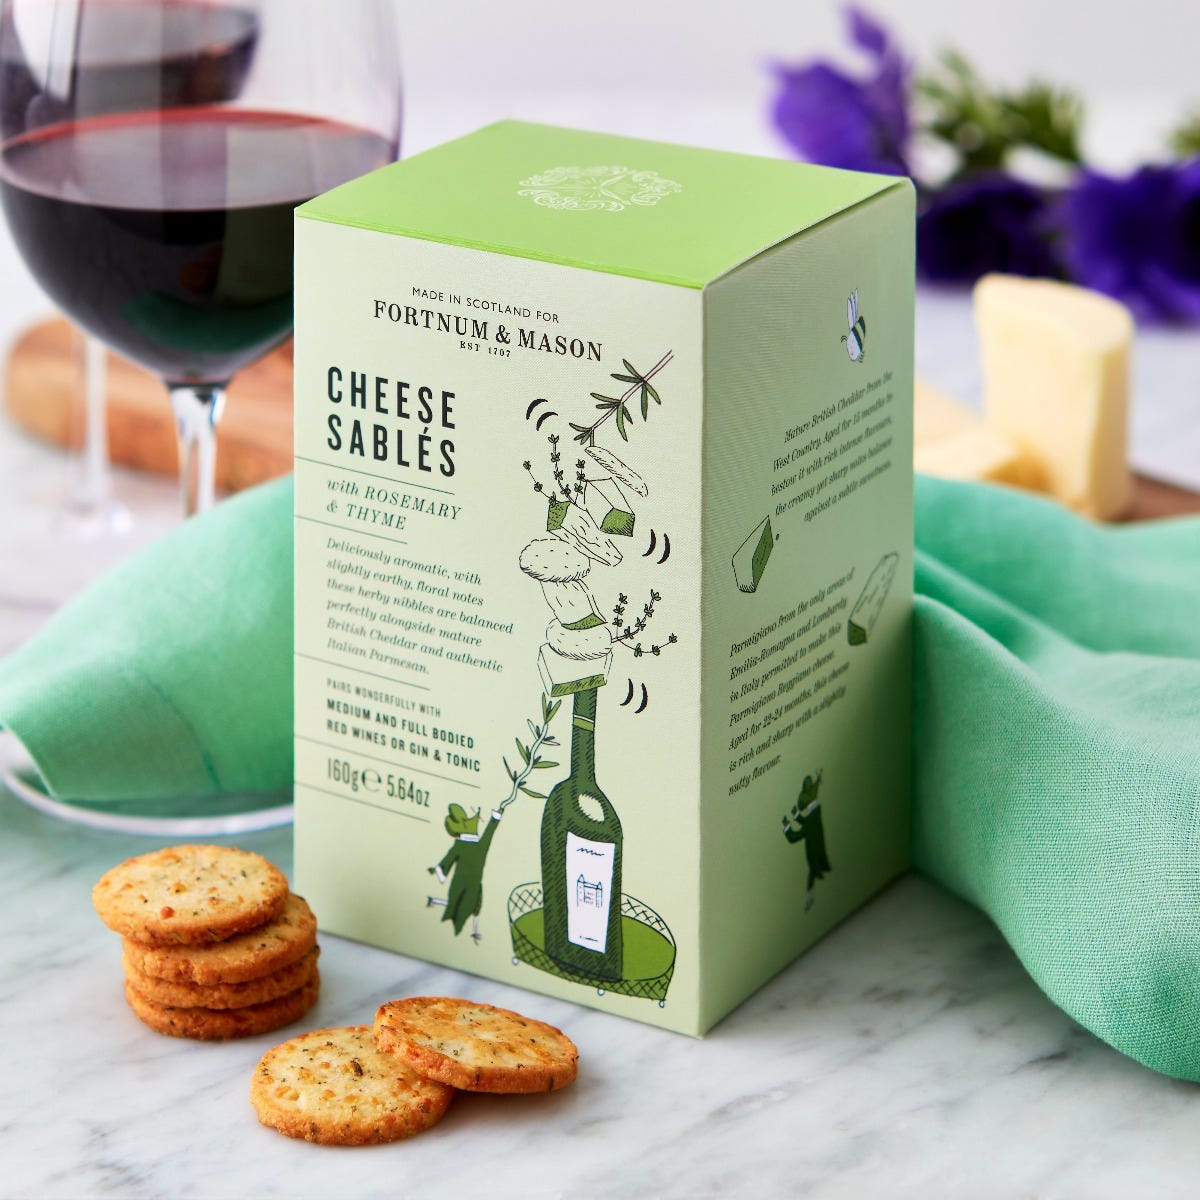 Cheese Sables with Rosemary & Thyme, 160g, Red Wine, Fortnum Mason